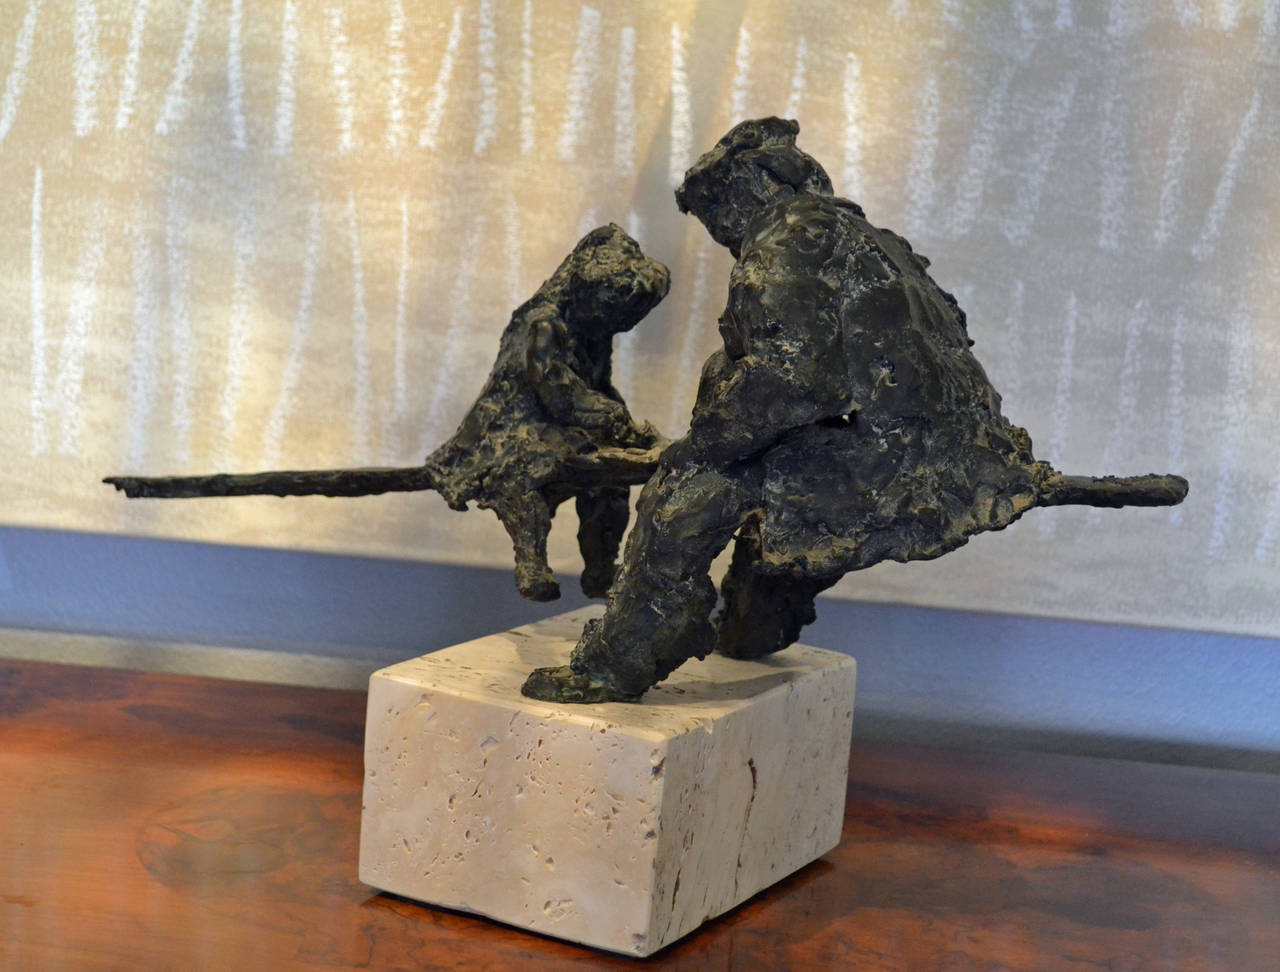 This bronze sculpture, circa 1965, of two figures - one a young girl. The other a older man is full of character, whimsy and moment. Both figures on a seesaw are mounted on a Travertine base. The bronze sculpture extends beyond the base at each end,